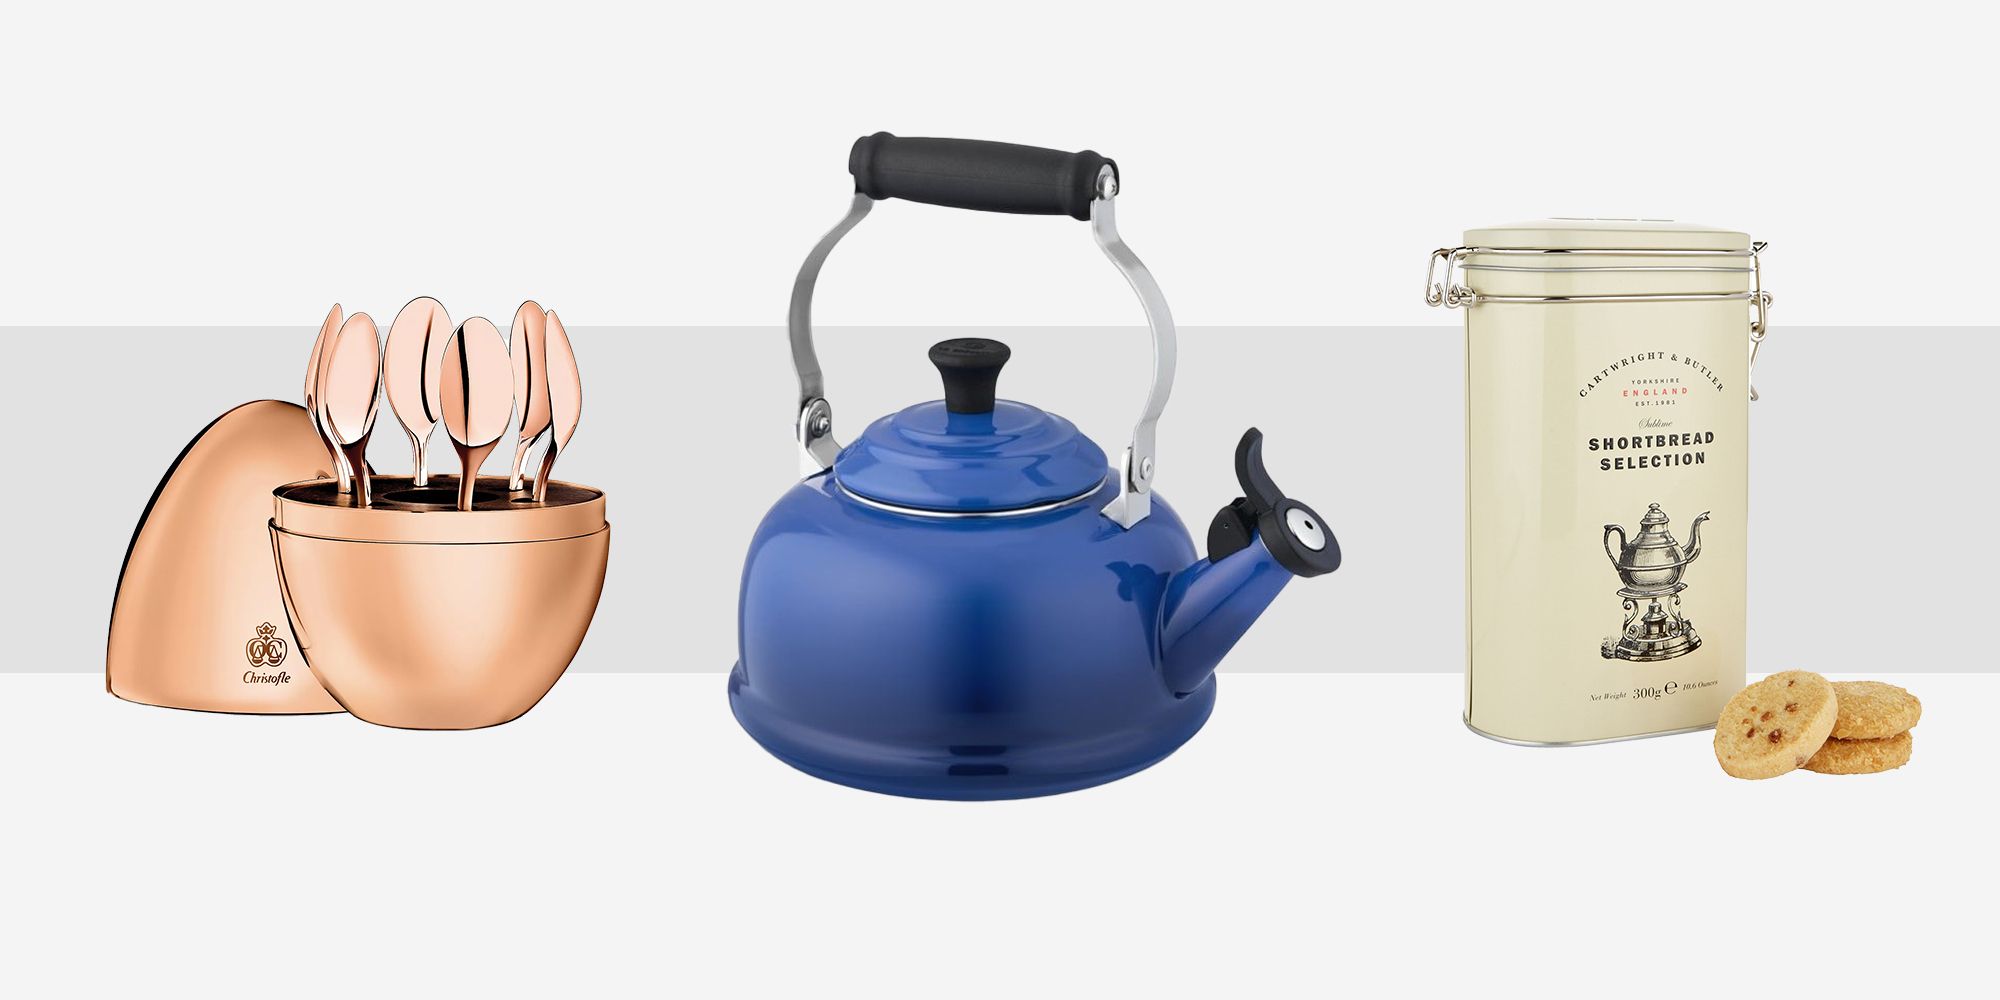 Still Looking for a Gift? Consider a Cute Tea Kettle